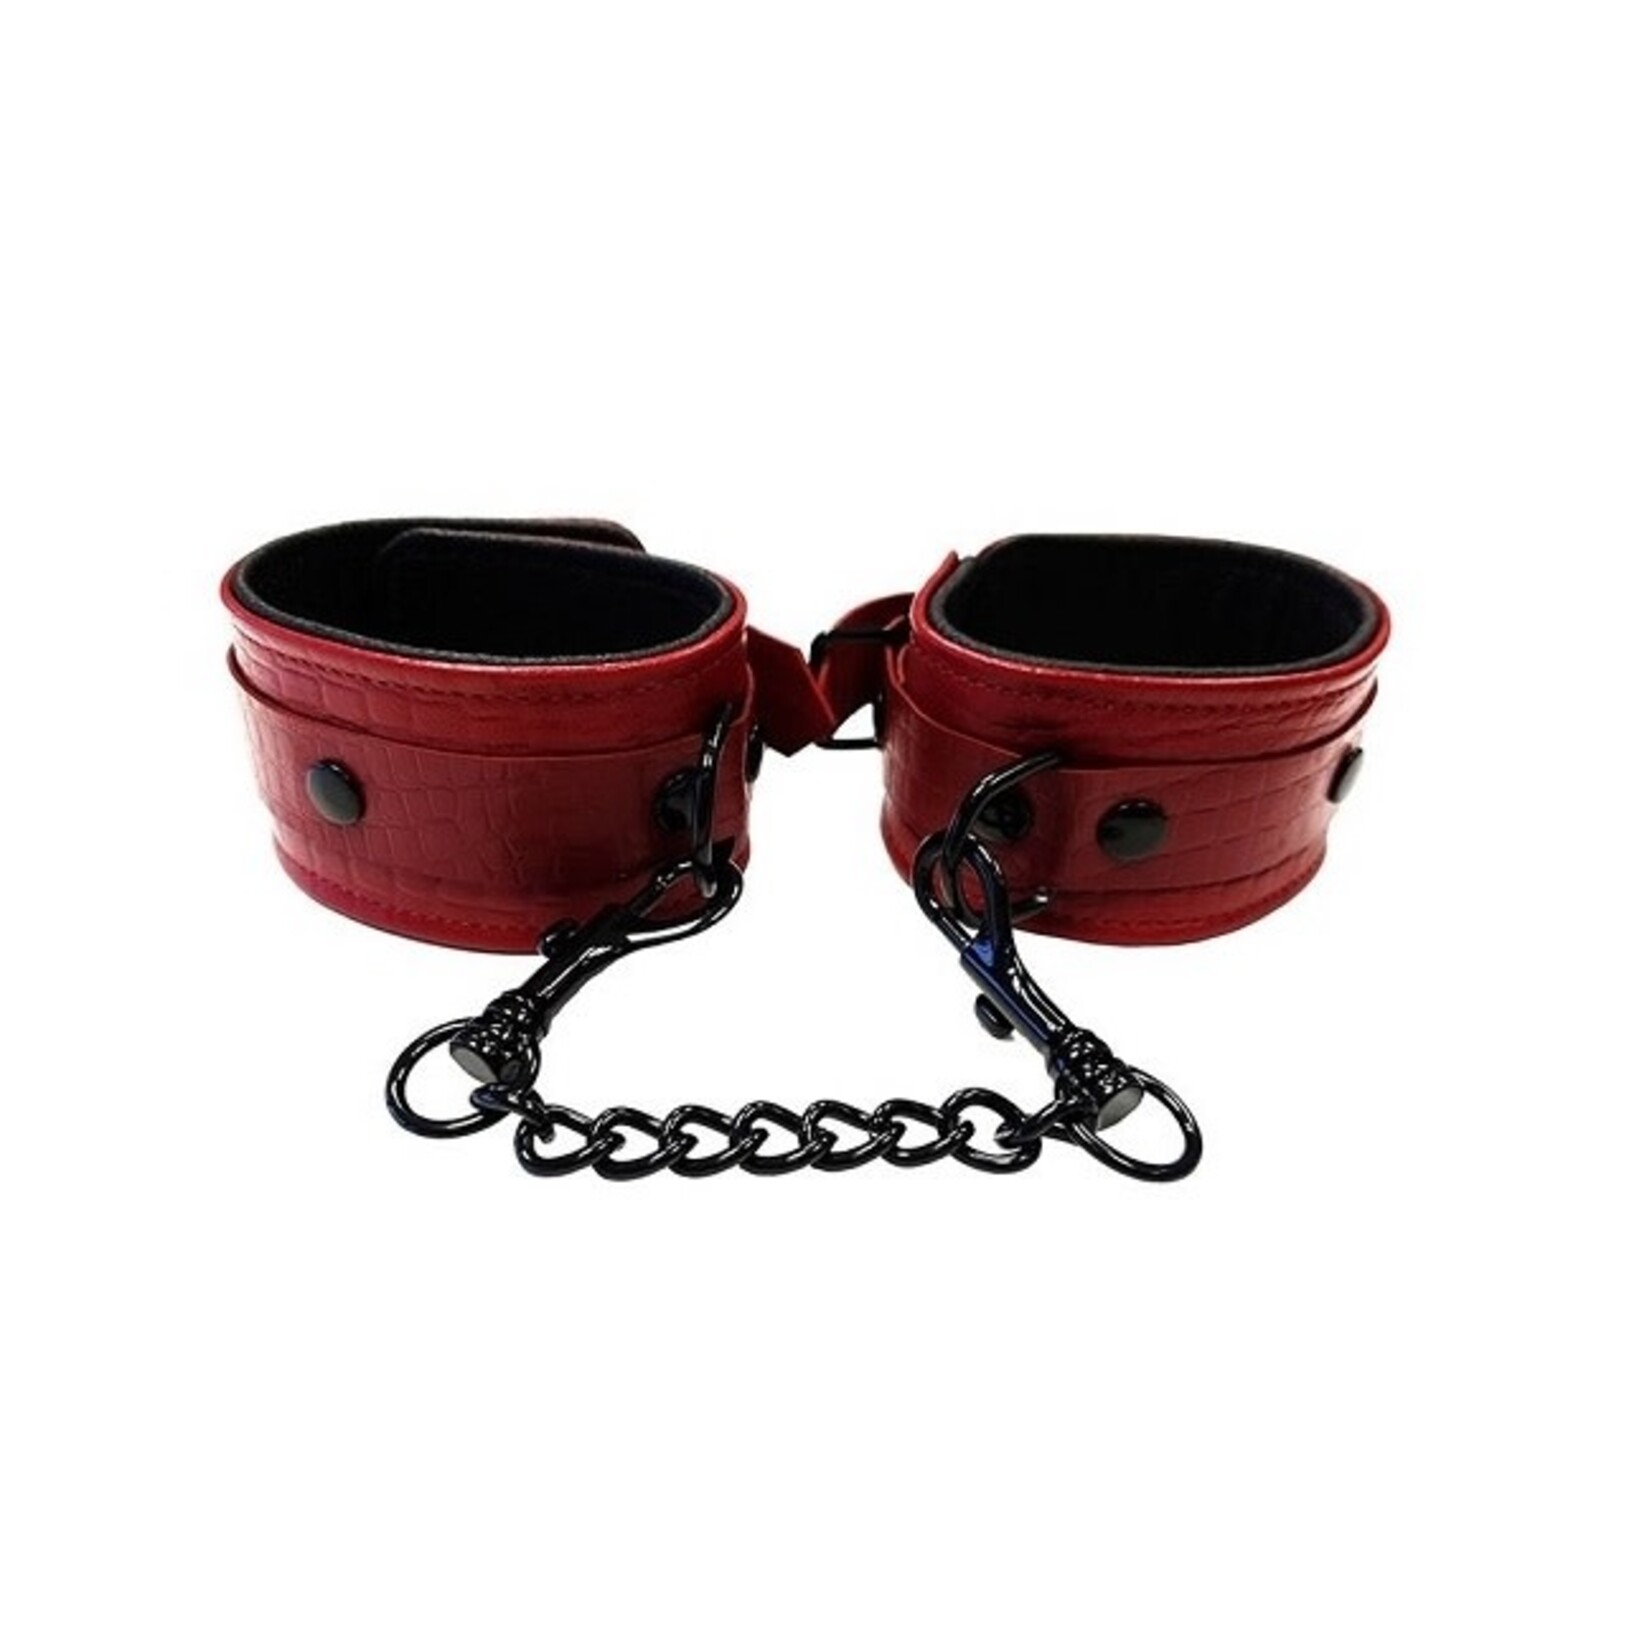 Rouge High Quality Leather Padded Ankle Cuffs For Bondage